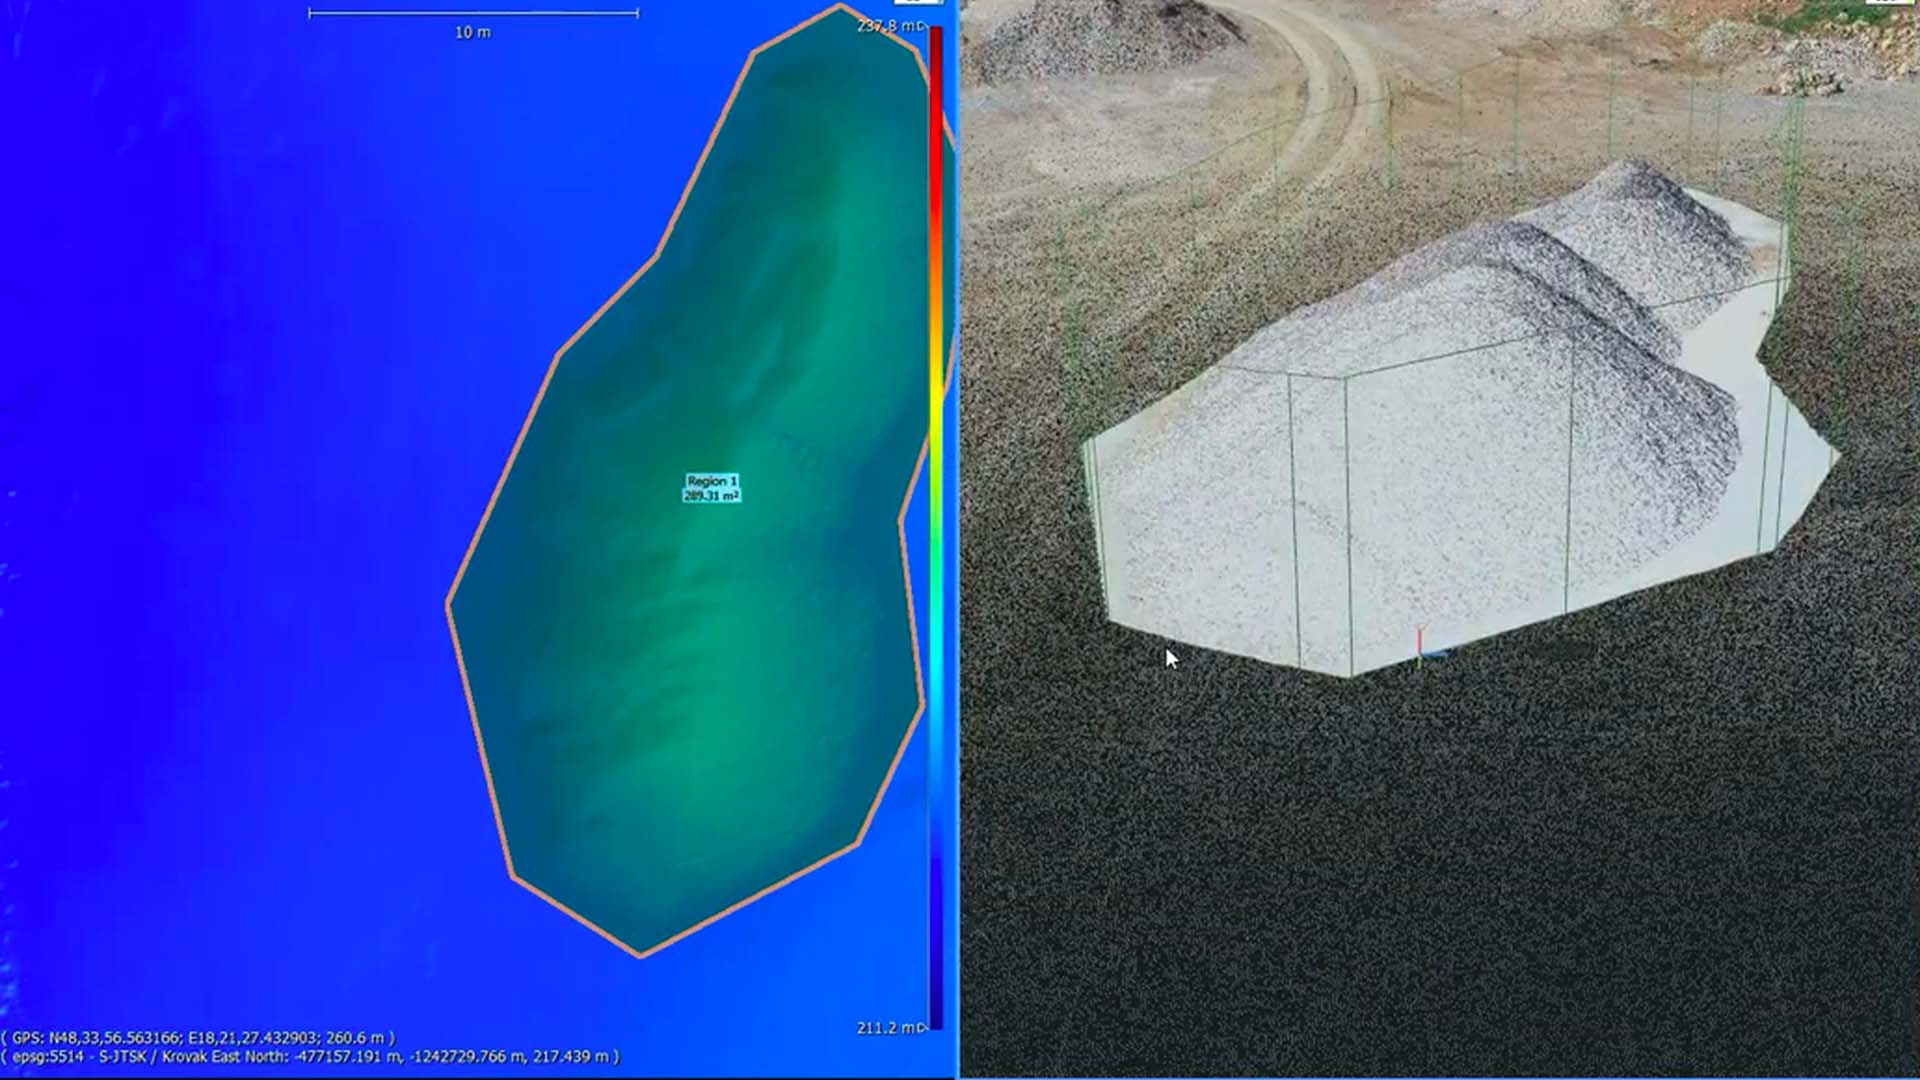 Revolutionise Your Stockpile Measurements with Drone Mapping